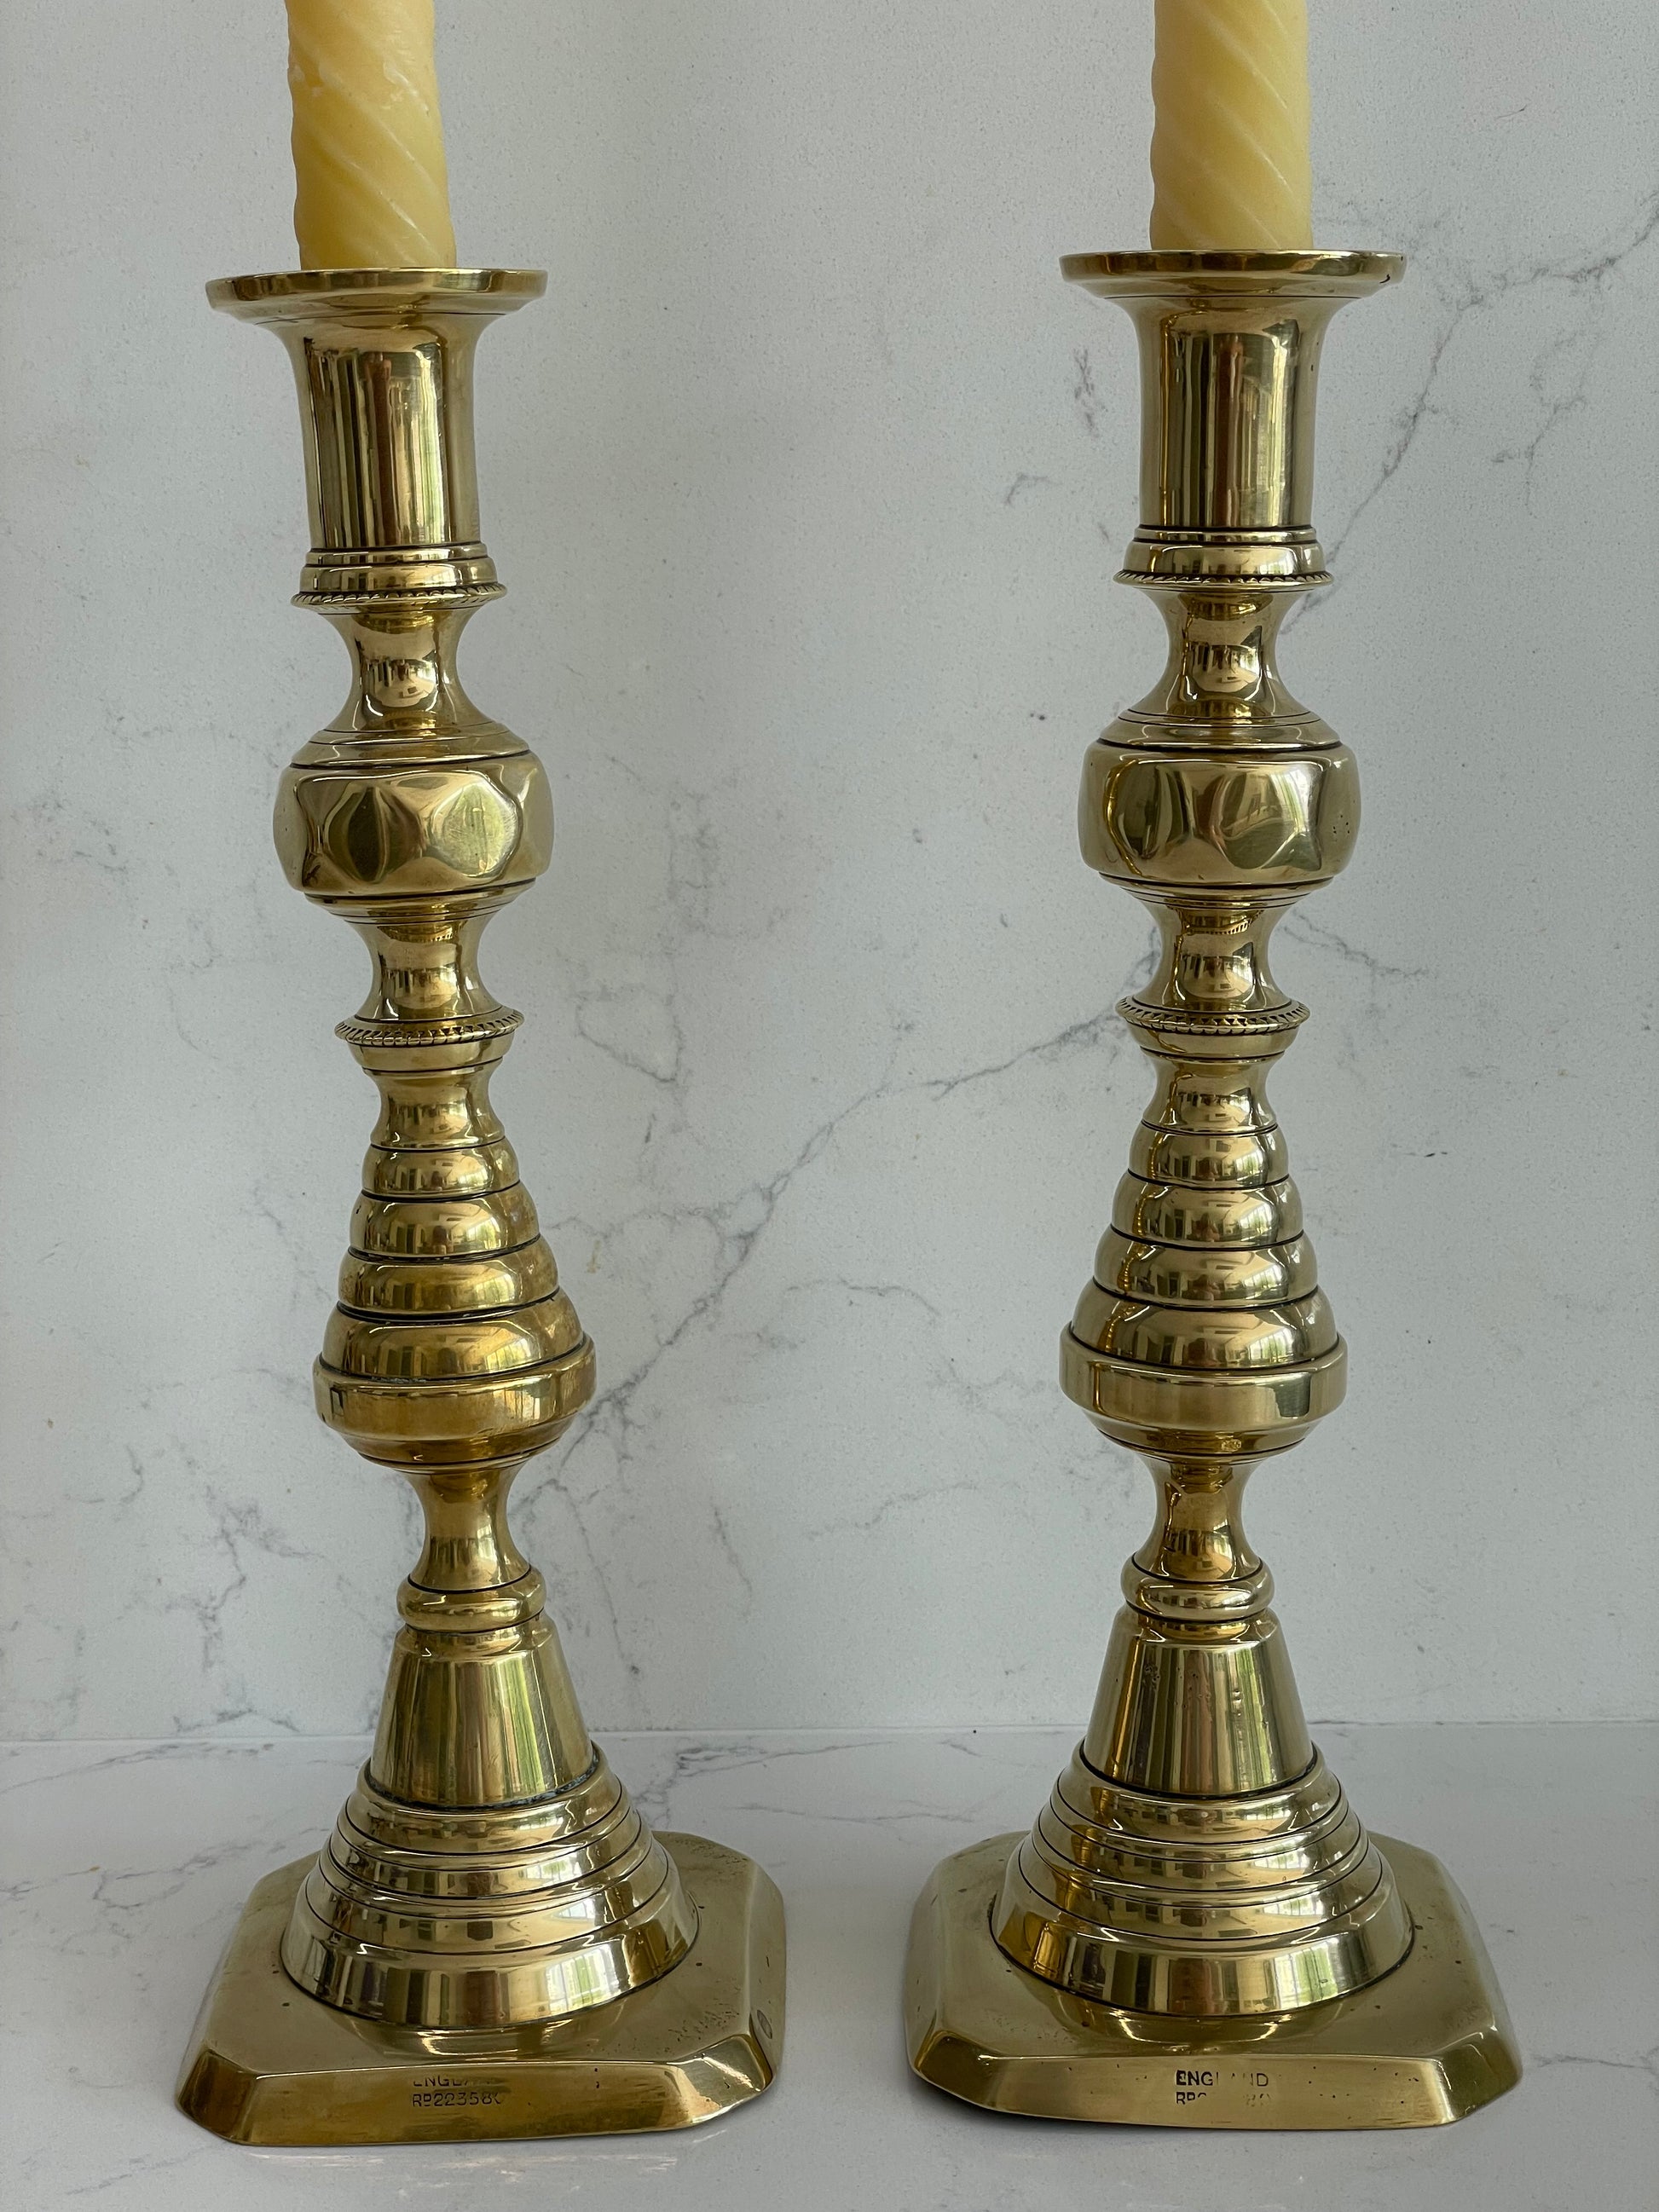 Unique pair of antique English Victorian 19th Century brass candlesticks  stamped with Registration Design 223580 with 2 matching 100% London Beeswax